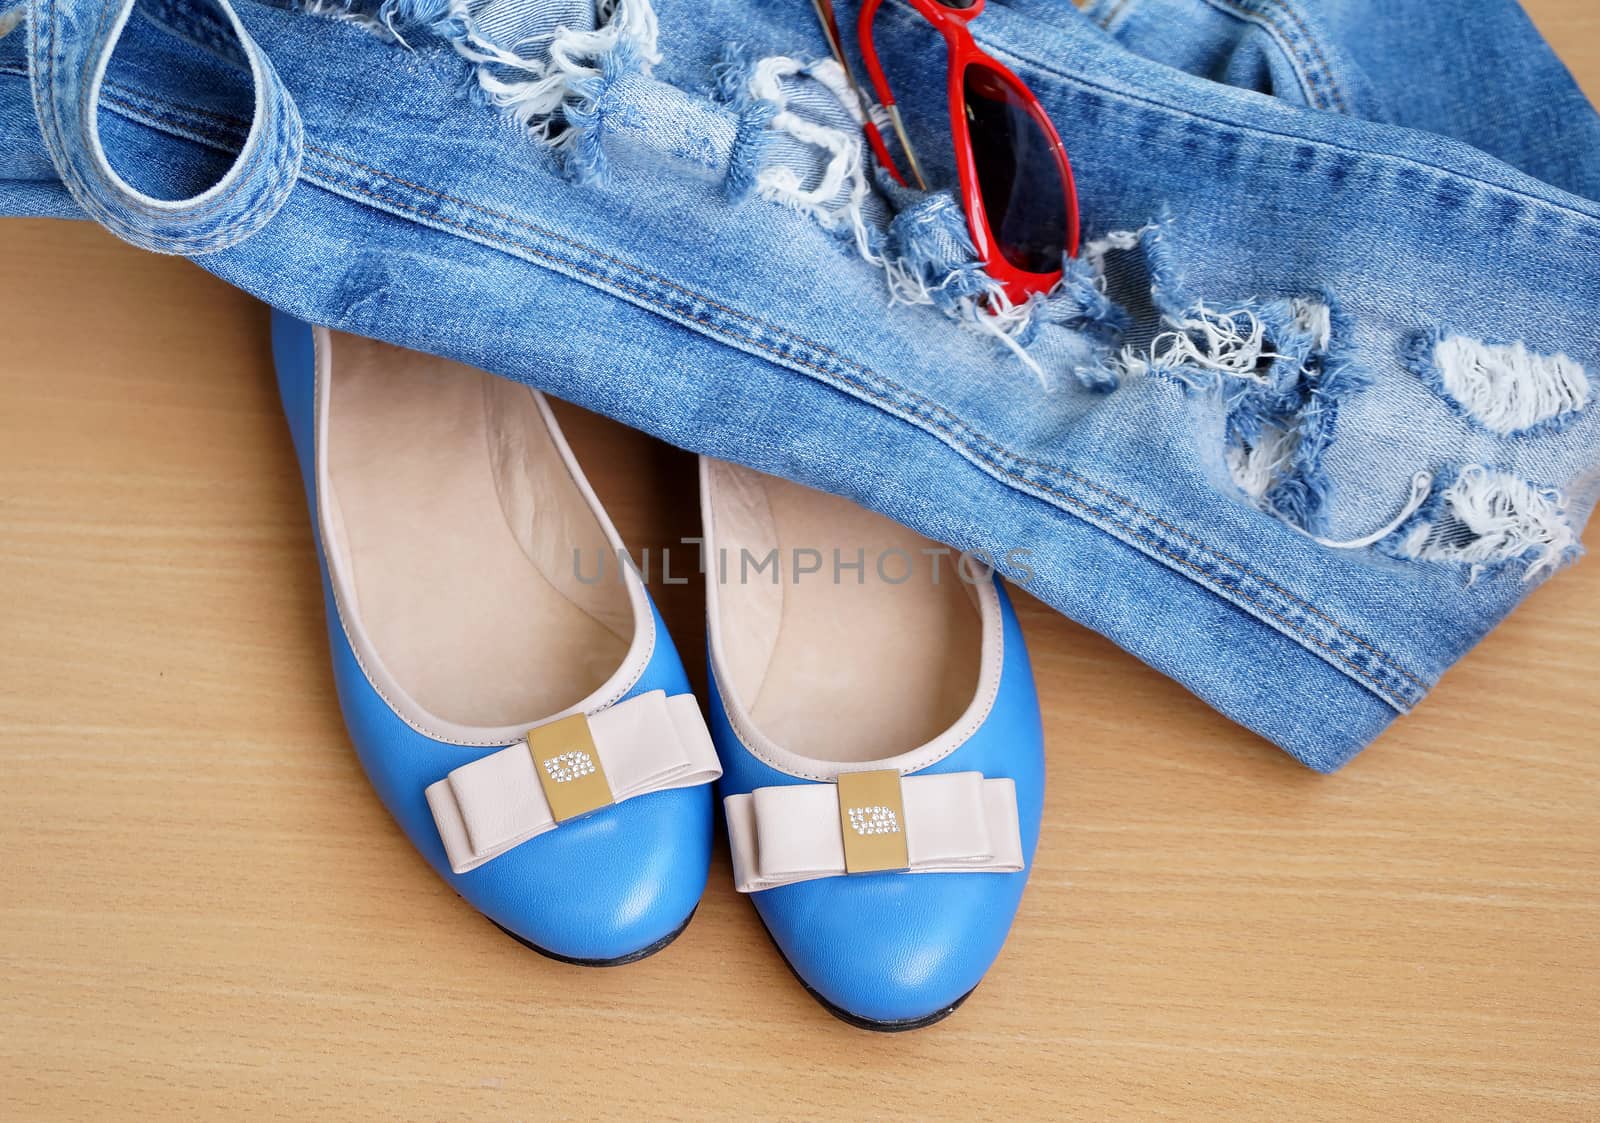 Turquoise women's shoes - "court shoes" with jeans overalls